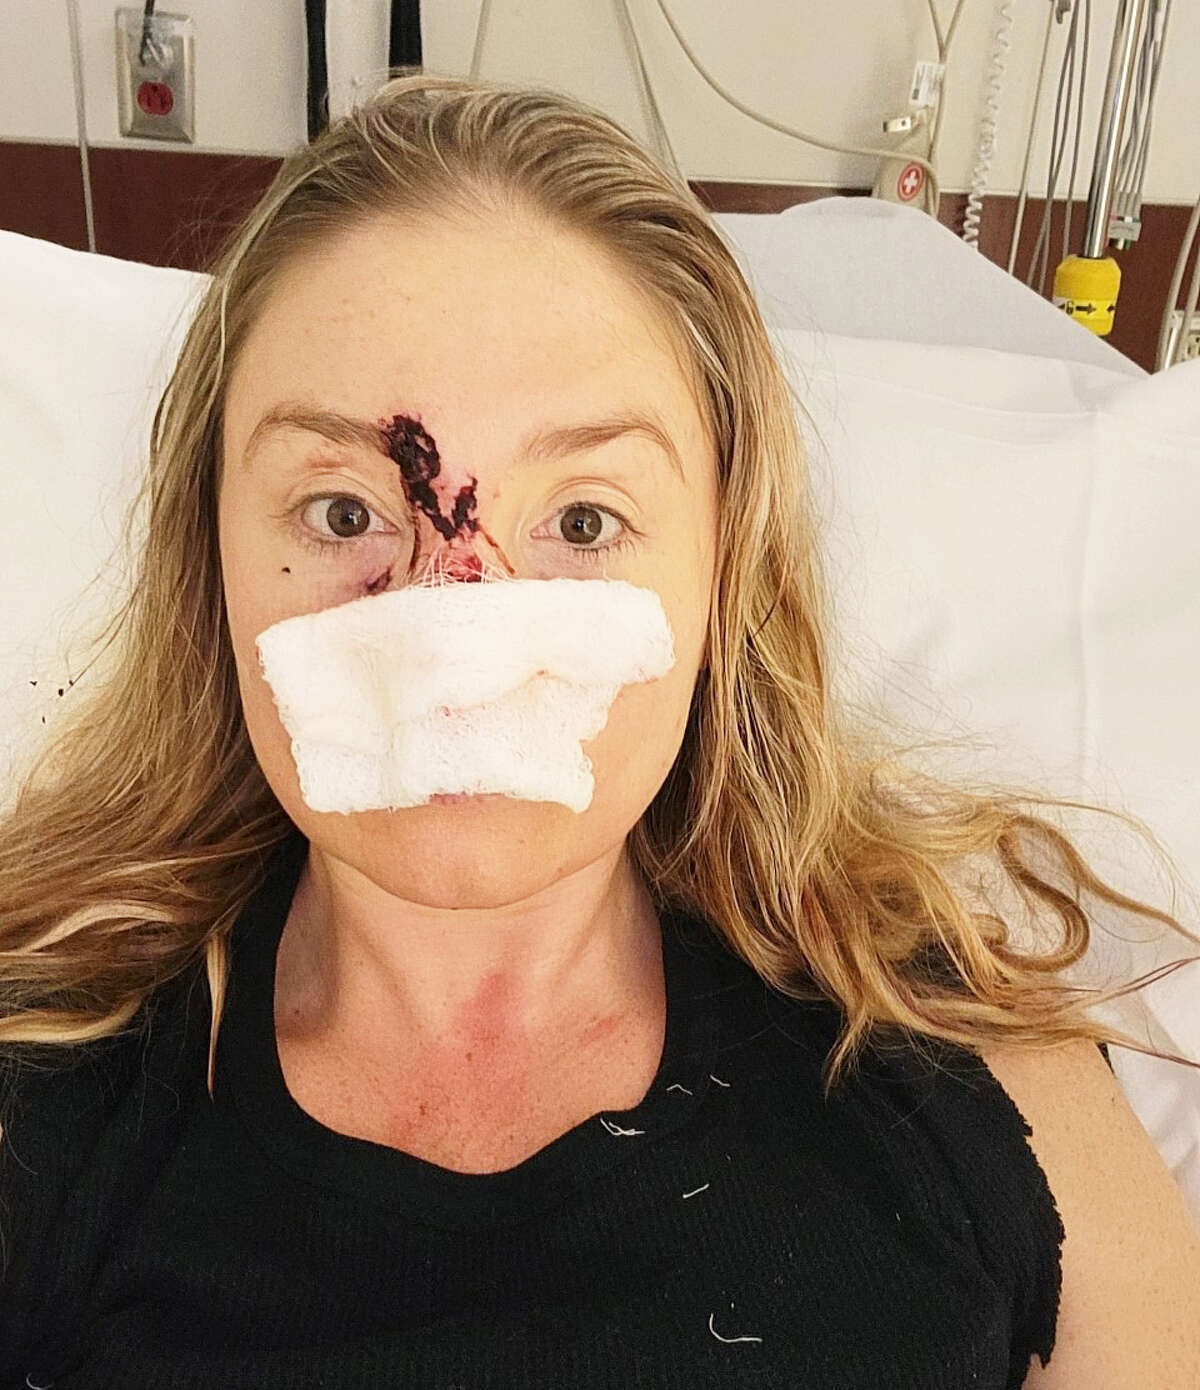 Olivia Quast, 30, formerly of Middletown was attacked by her rescue dog Feb. 3, leaving her with a "mangled" arm and severe damage to her face. A GoFundMe has been set up to help pay for medical bills associated with plastic surgery to replace her nose.